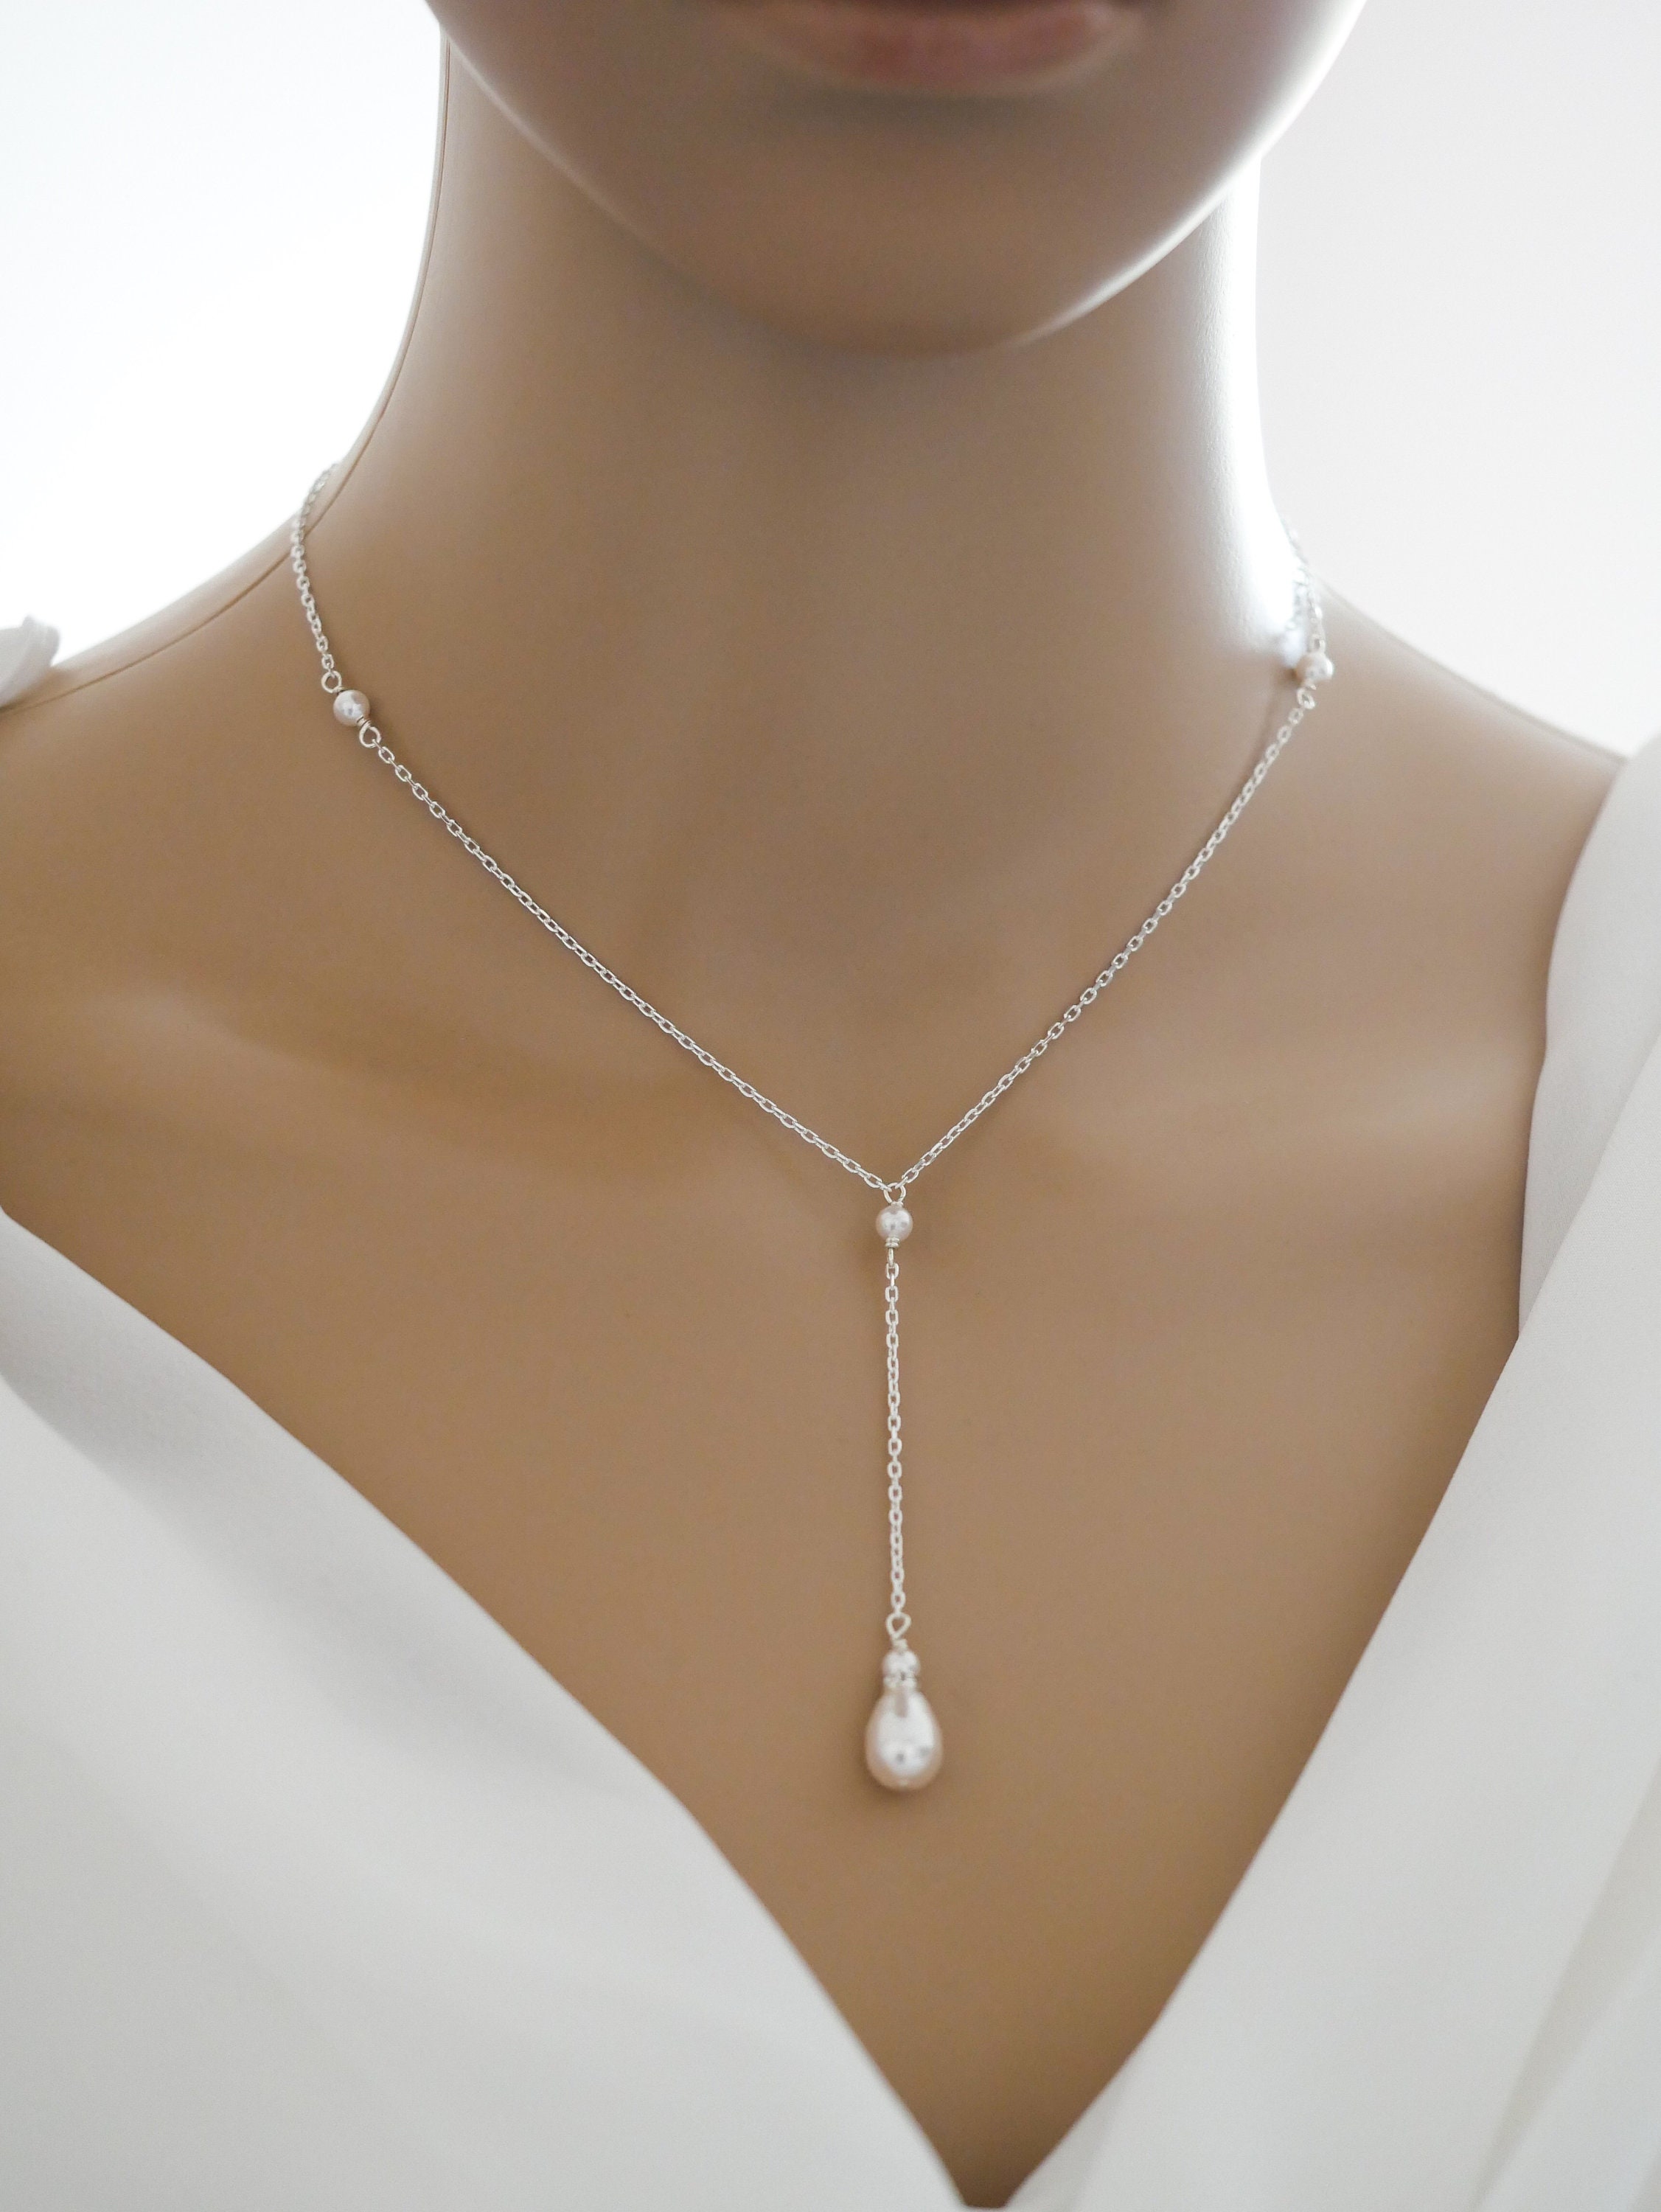 Swarovski pearl or crystal necklace choker or lariat with detachable ...